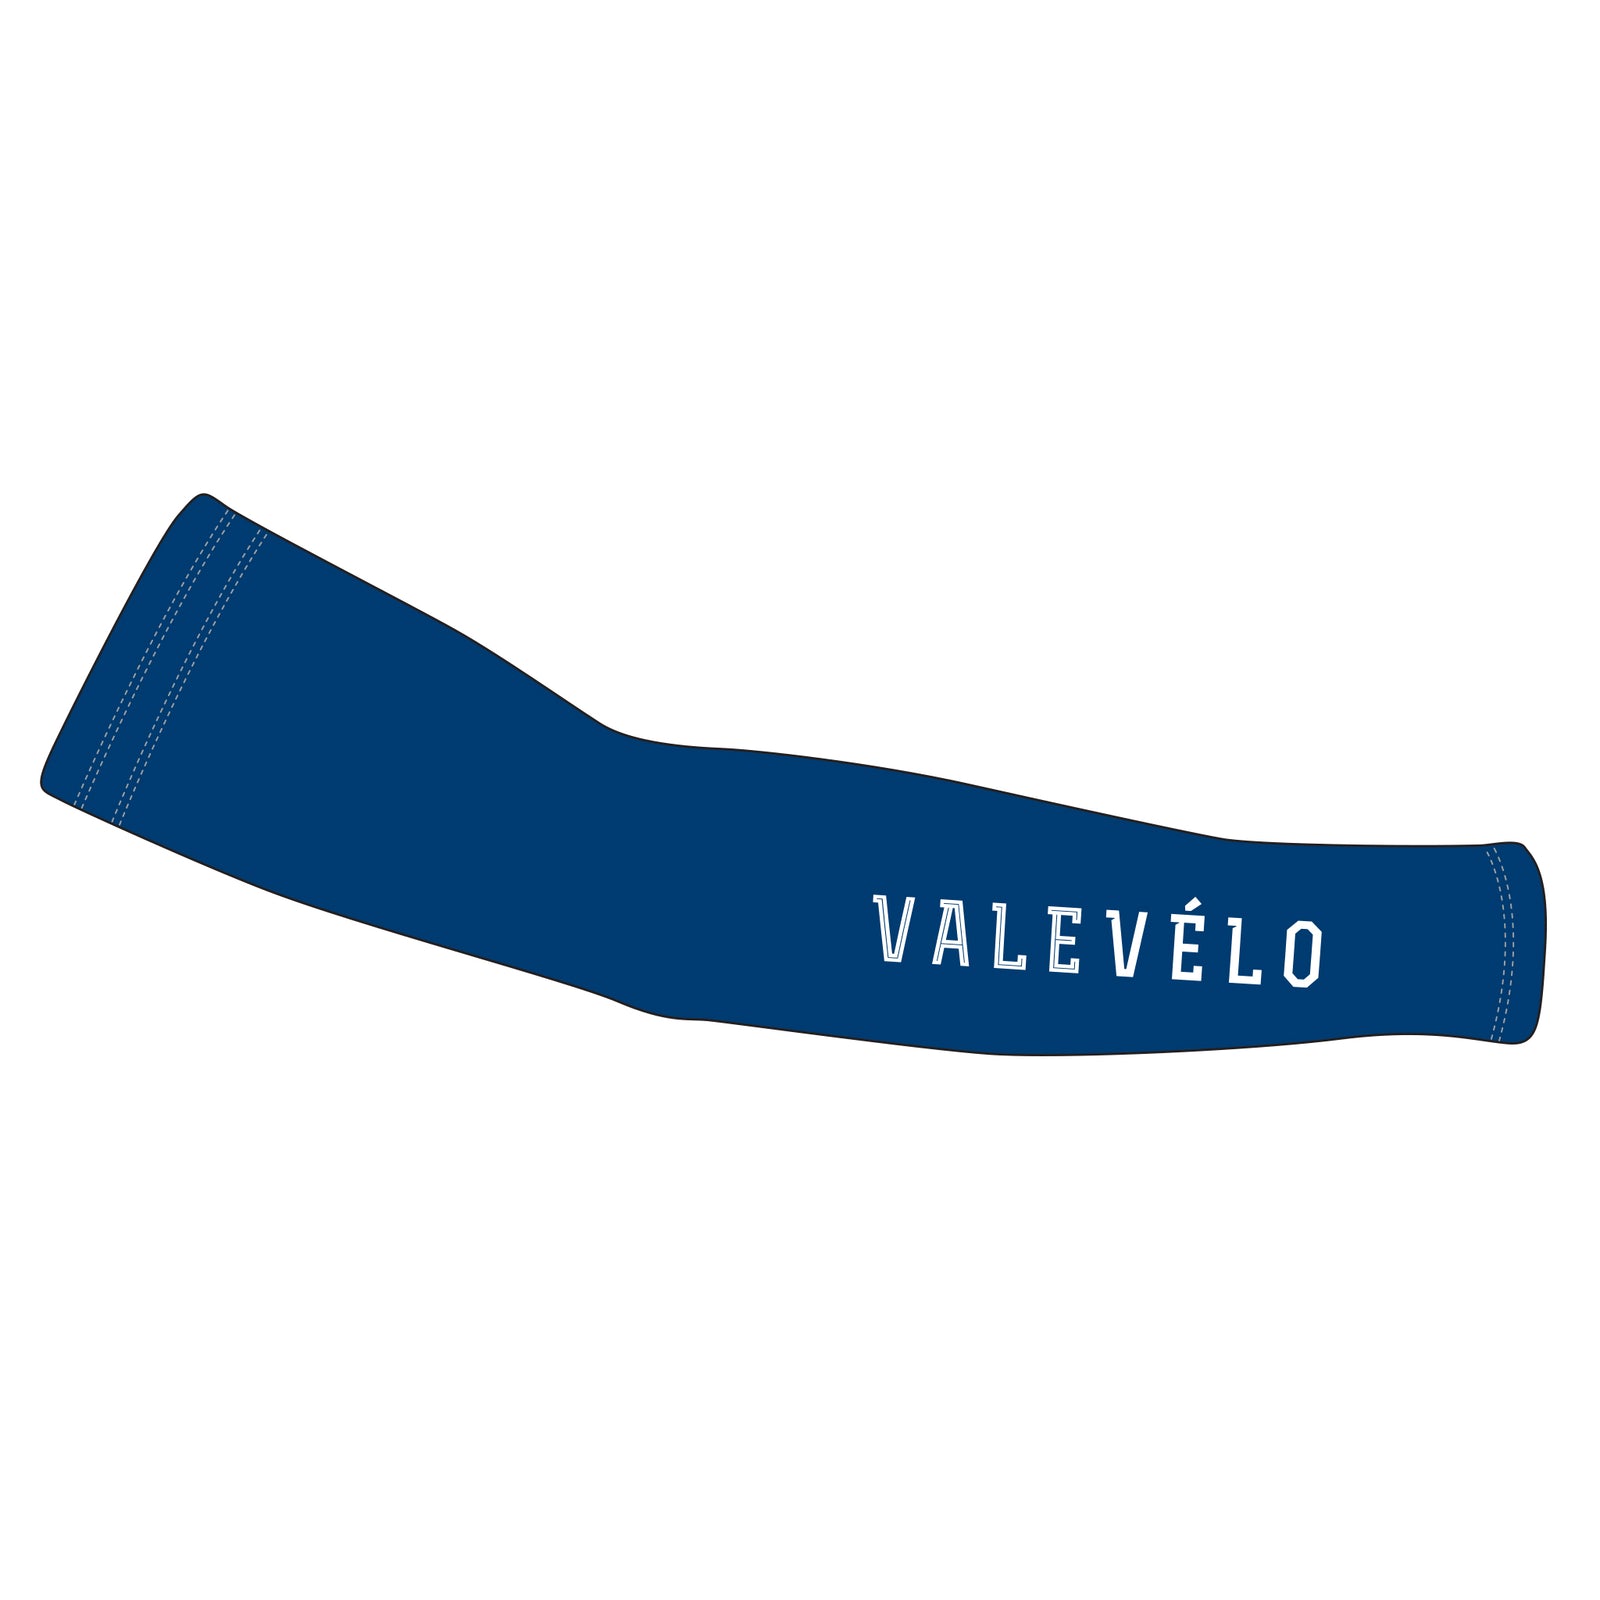 VALEVELO UNISEX SILVER Thermal Cycling Arm Warmers, BLUE